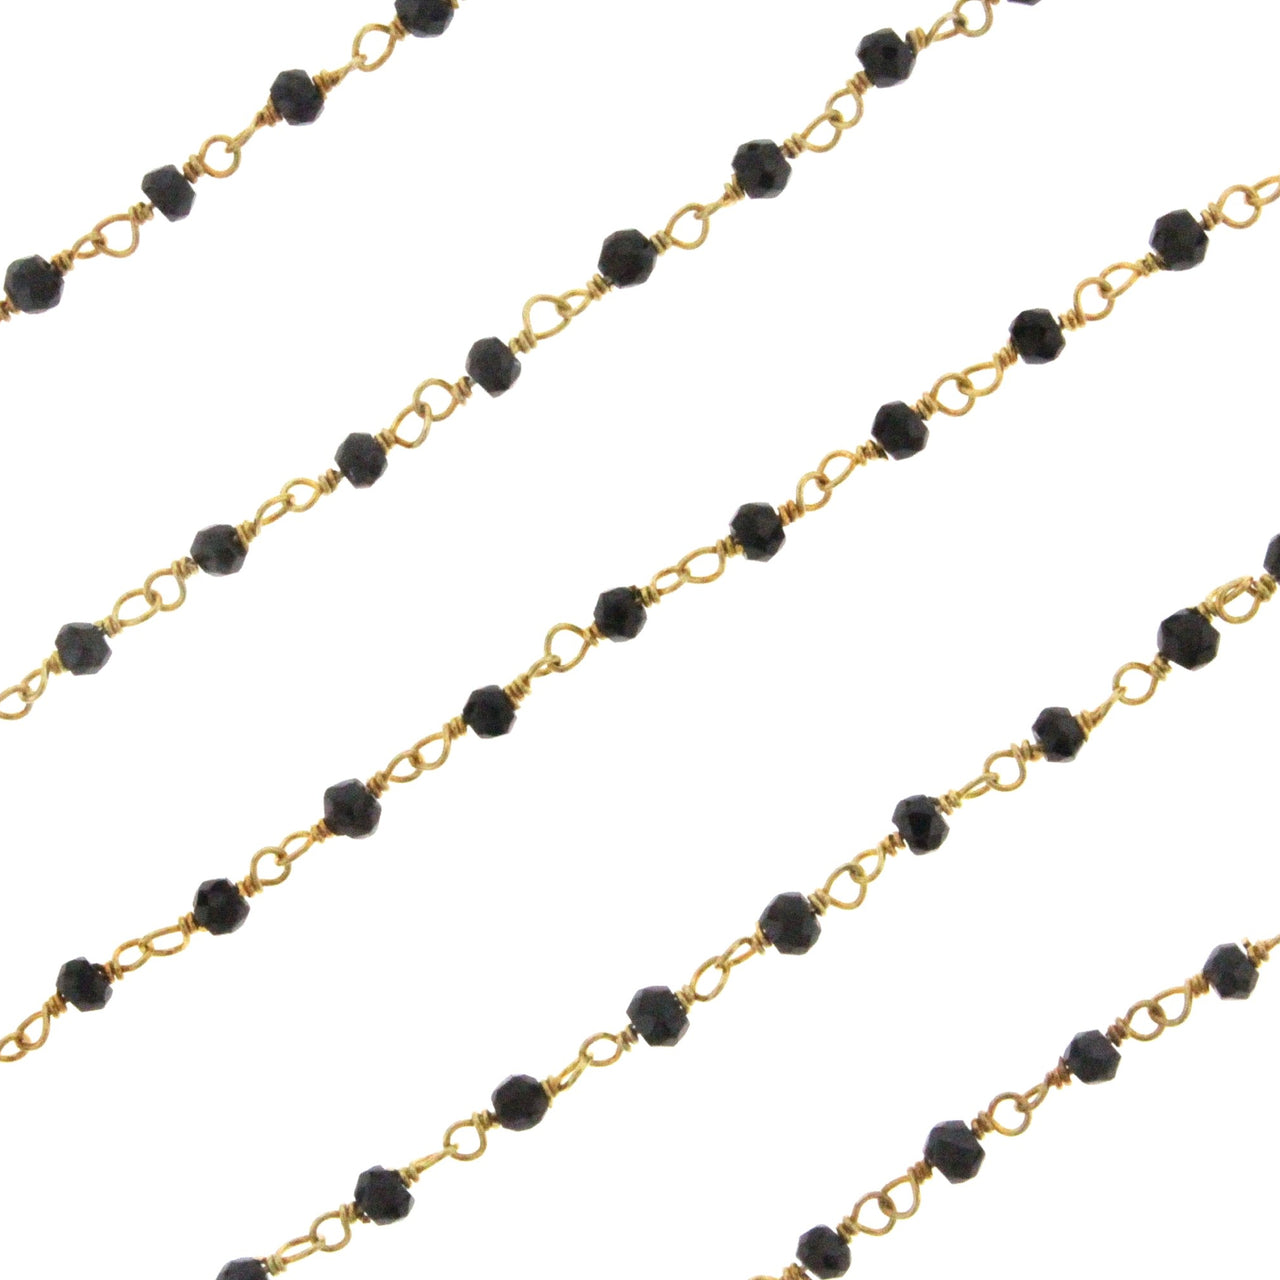 Black Spinel 3mm Faceted Rondelles Rosary Chain Sterling Silver with Gold Plating Wire Wrap Chain by the Foot